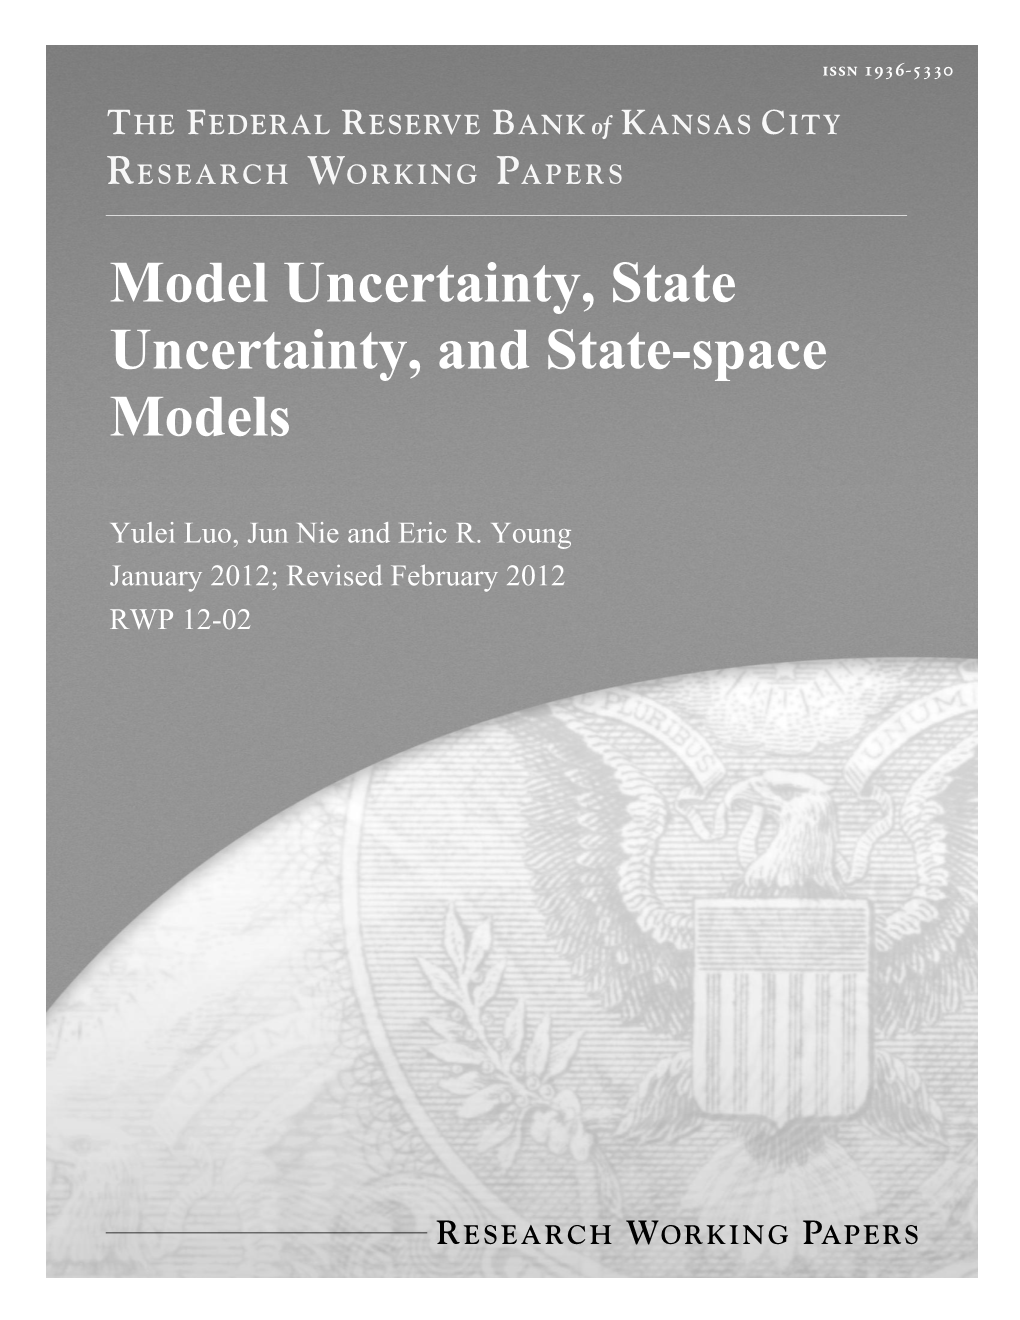 Model Uncertainty, State Uncertainty, and State-Space Models